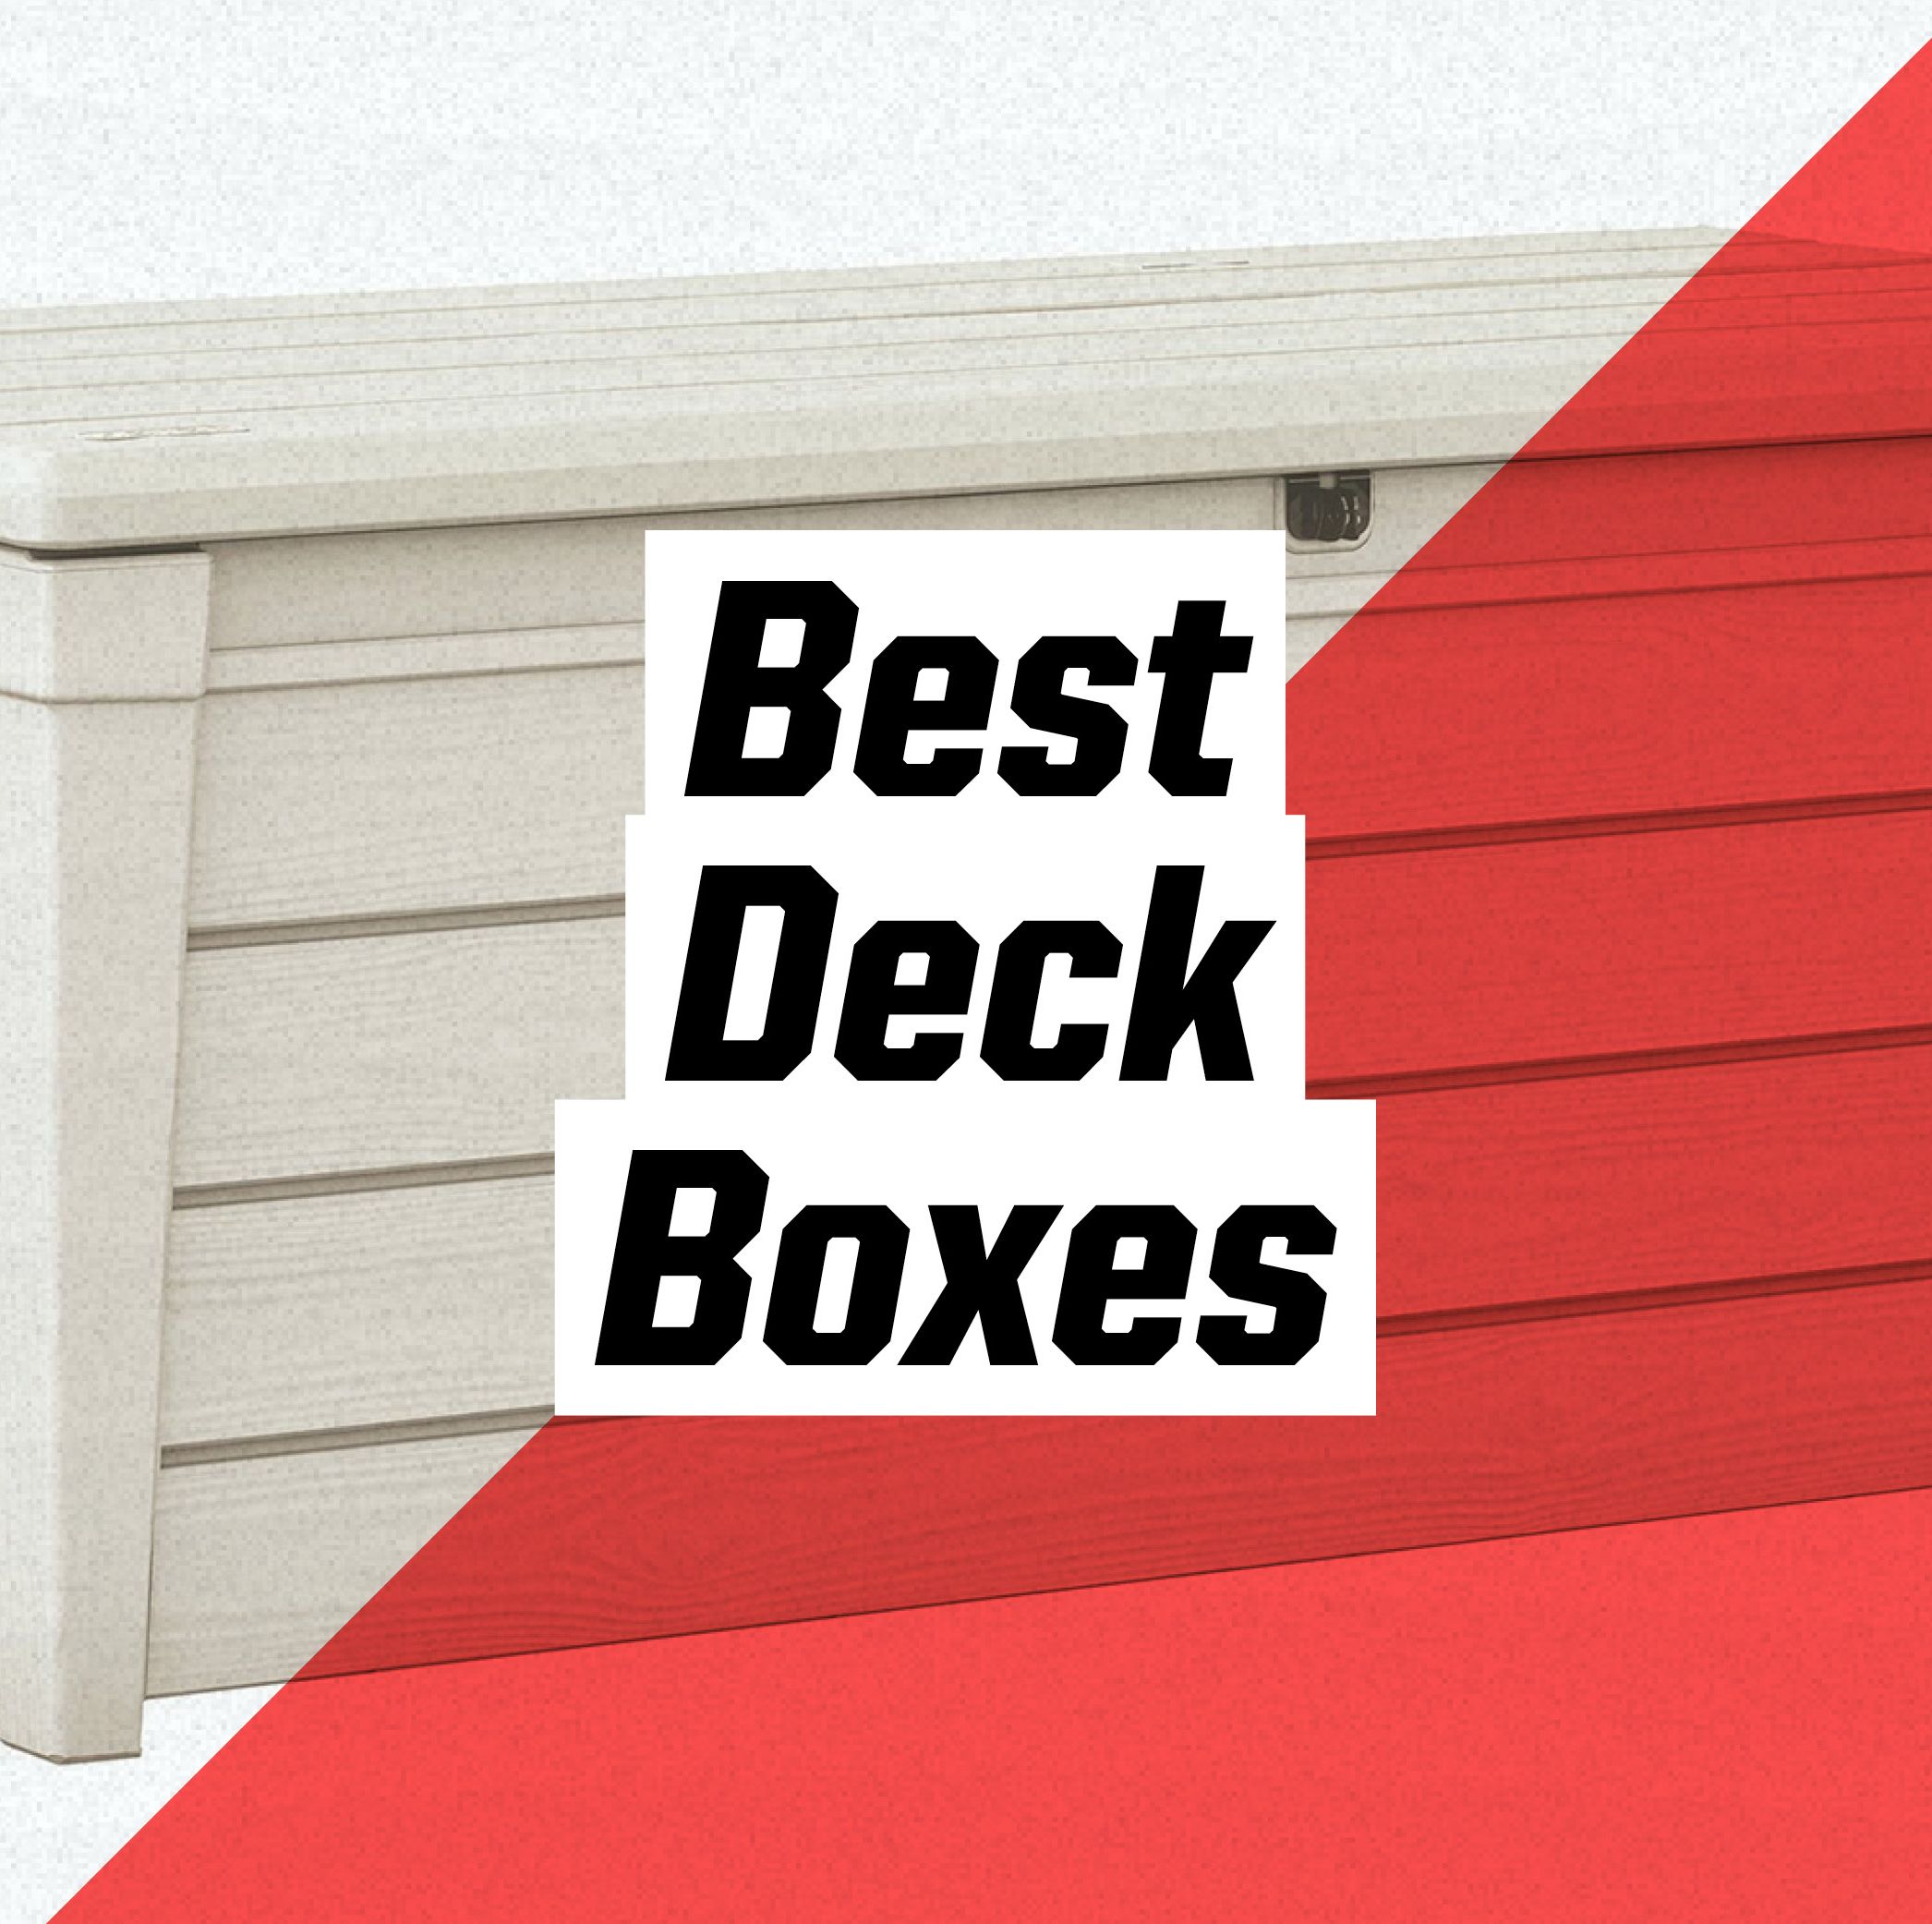 The Most Attractive and Practical Outdoor Storage and Deck Boxes to Buy Right Now